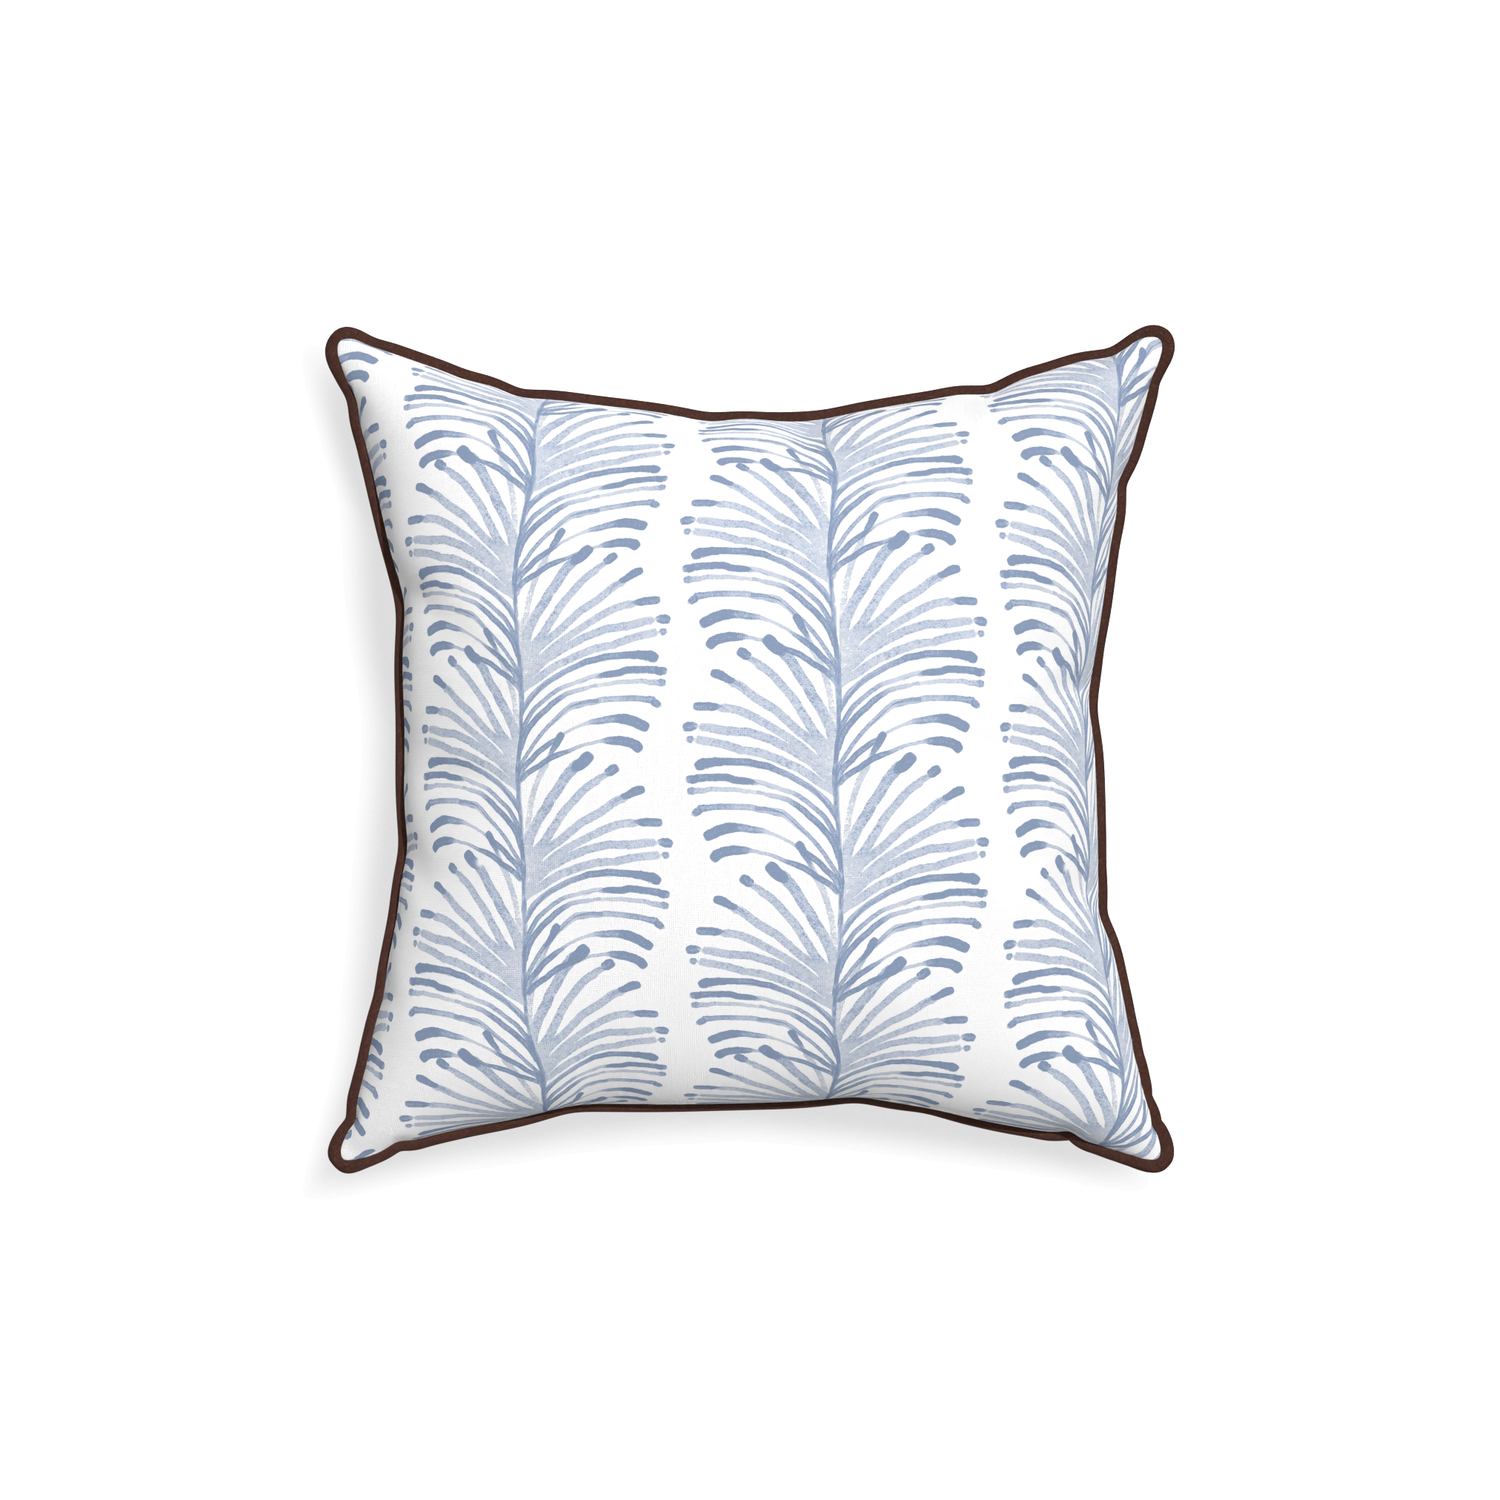 18-square emma sky custom sky blue botanical stripepillow with w piping on white background